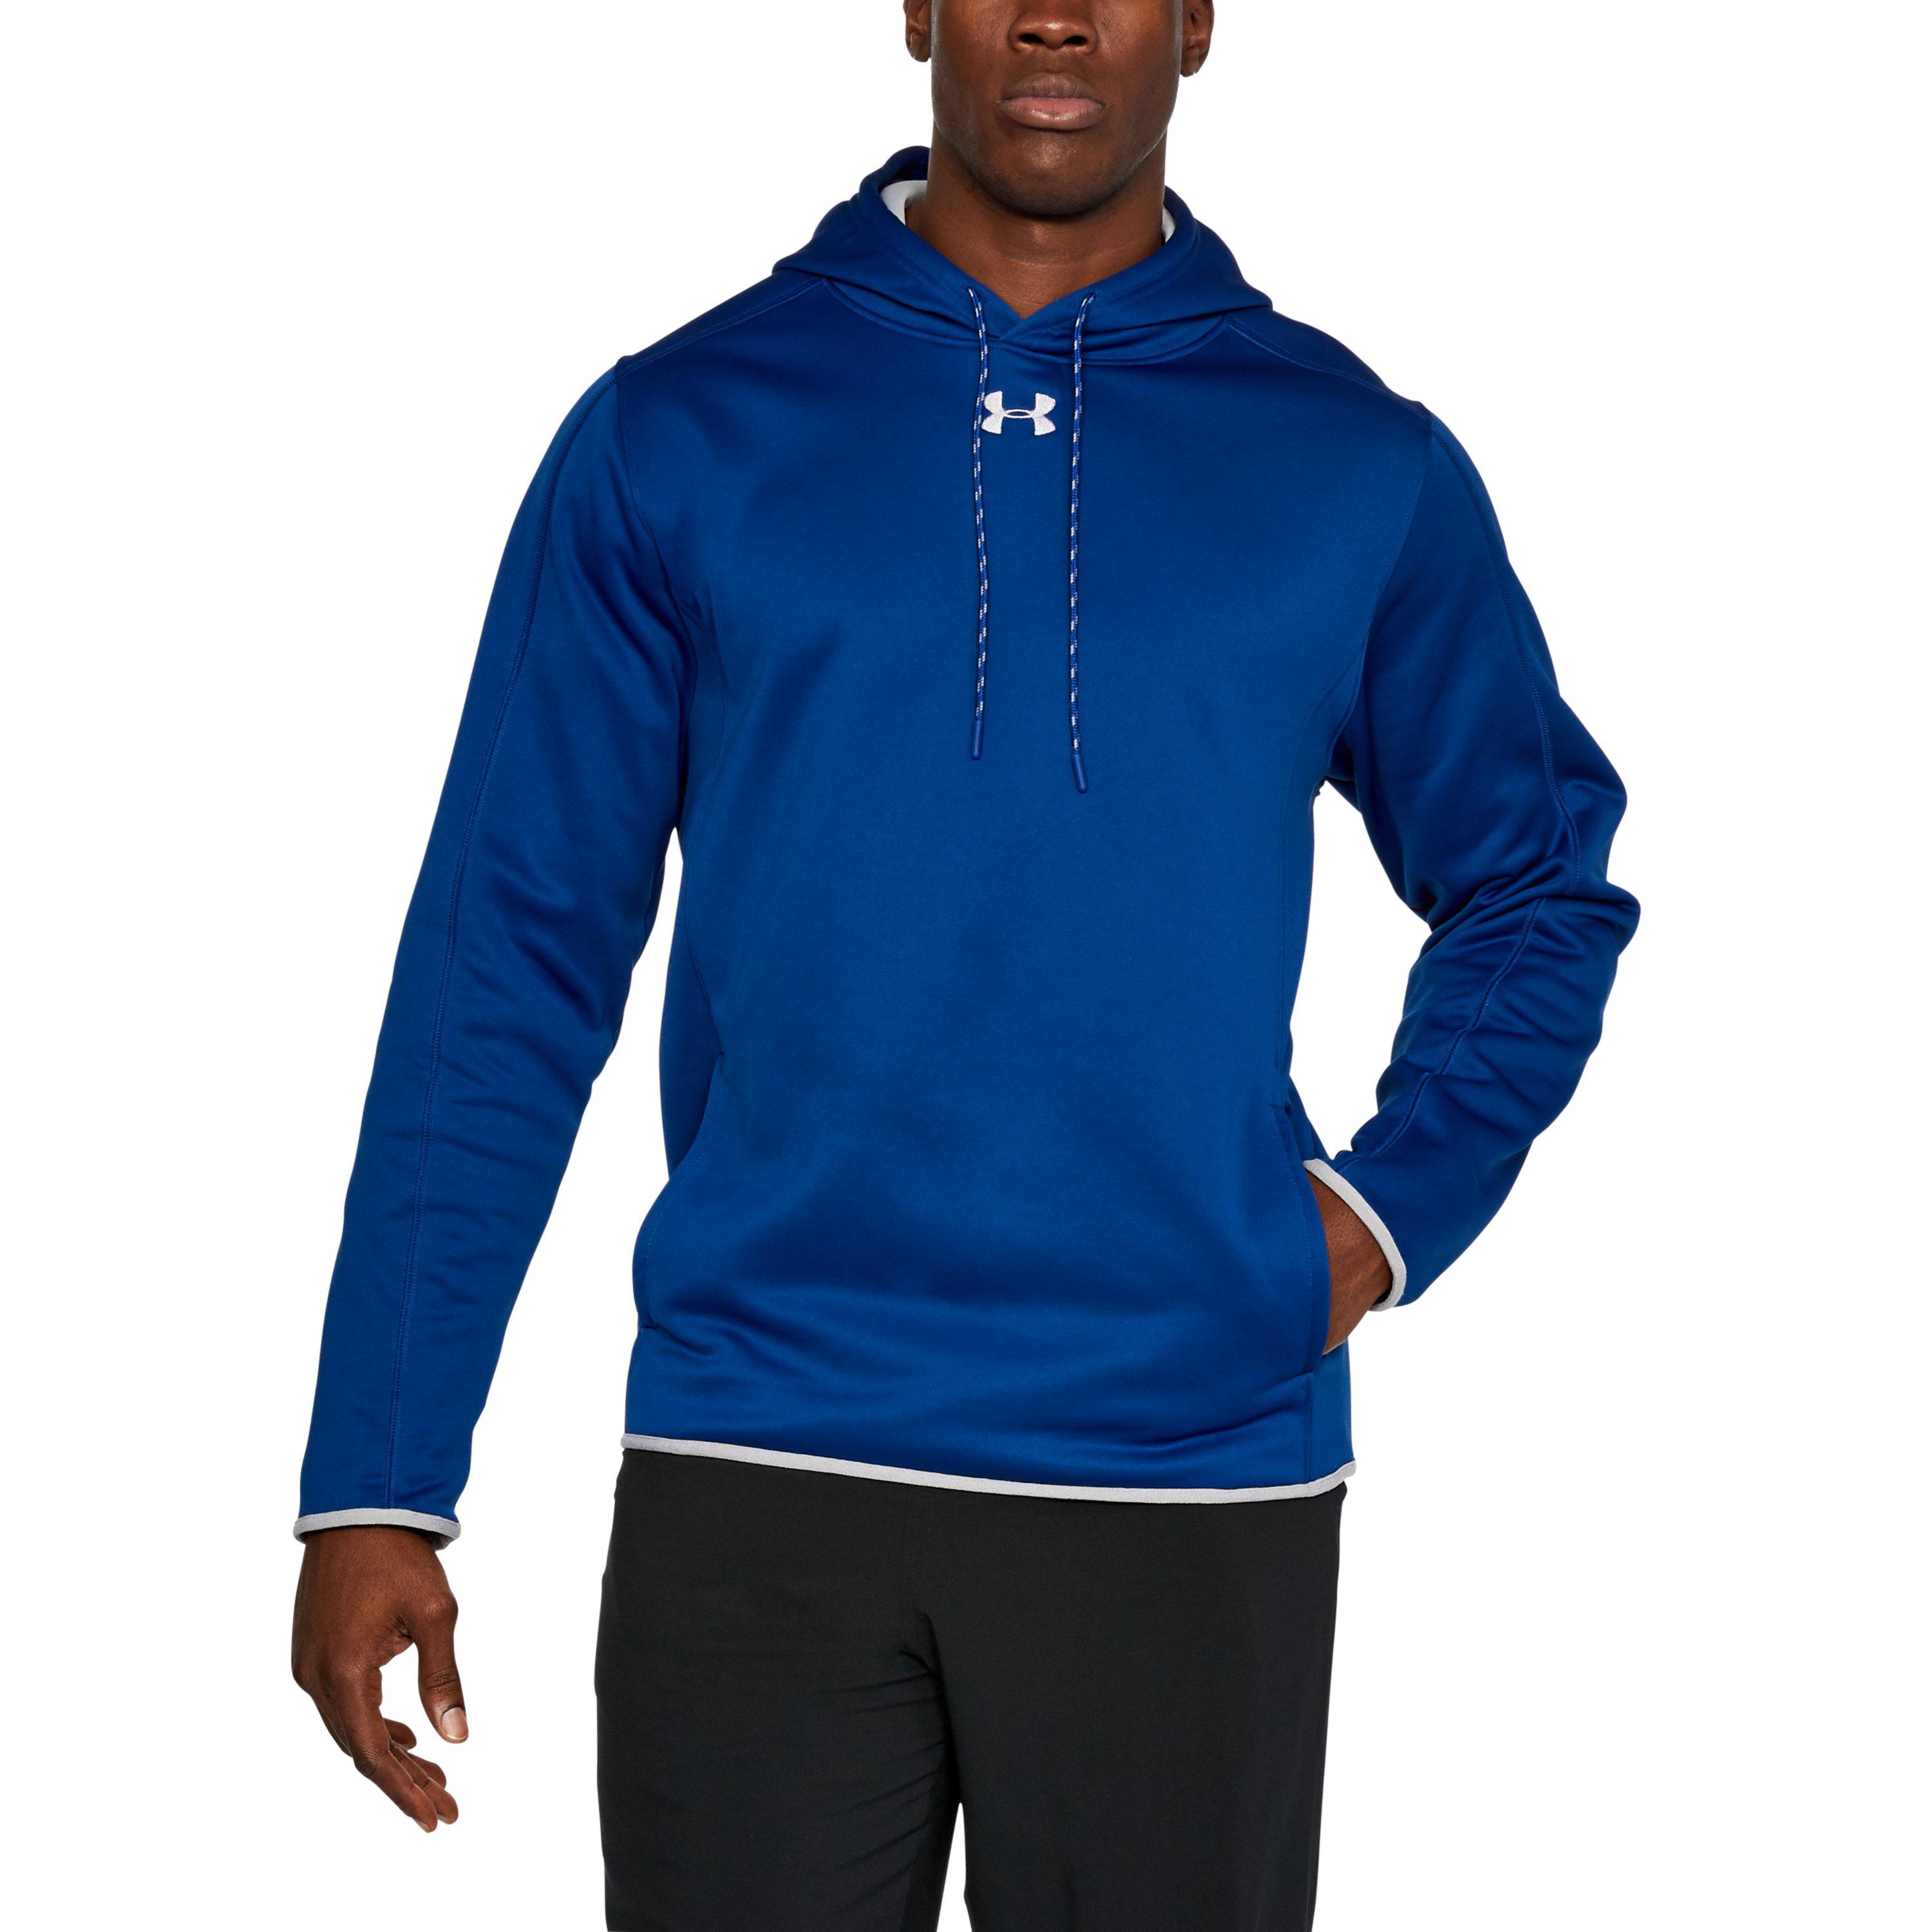 Mens Blue Under Armour Hoodie - almoire